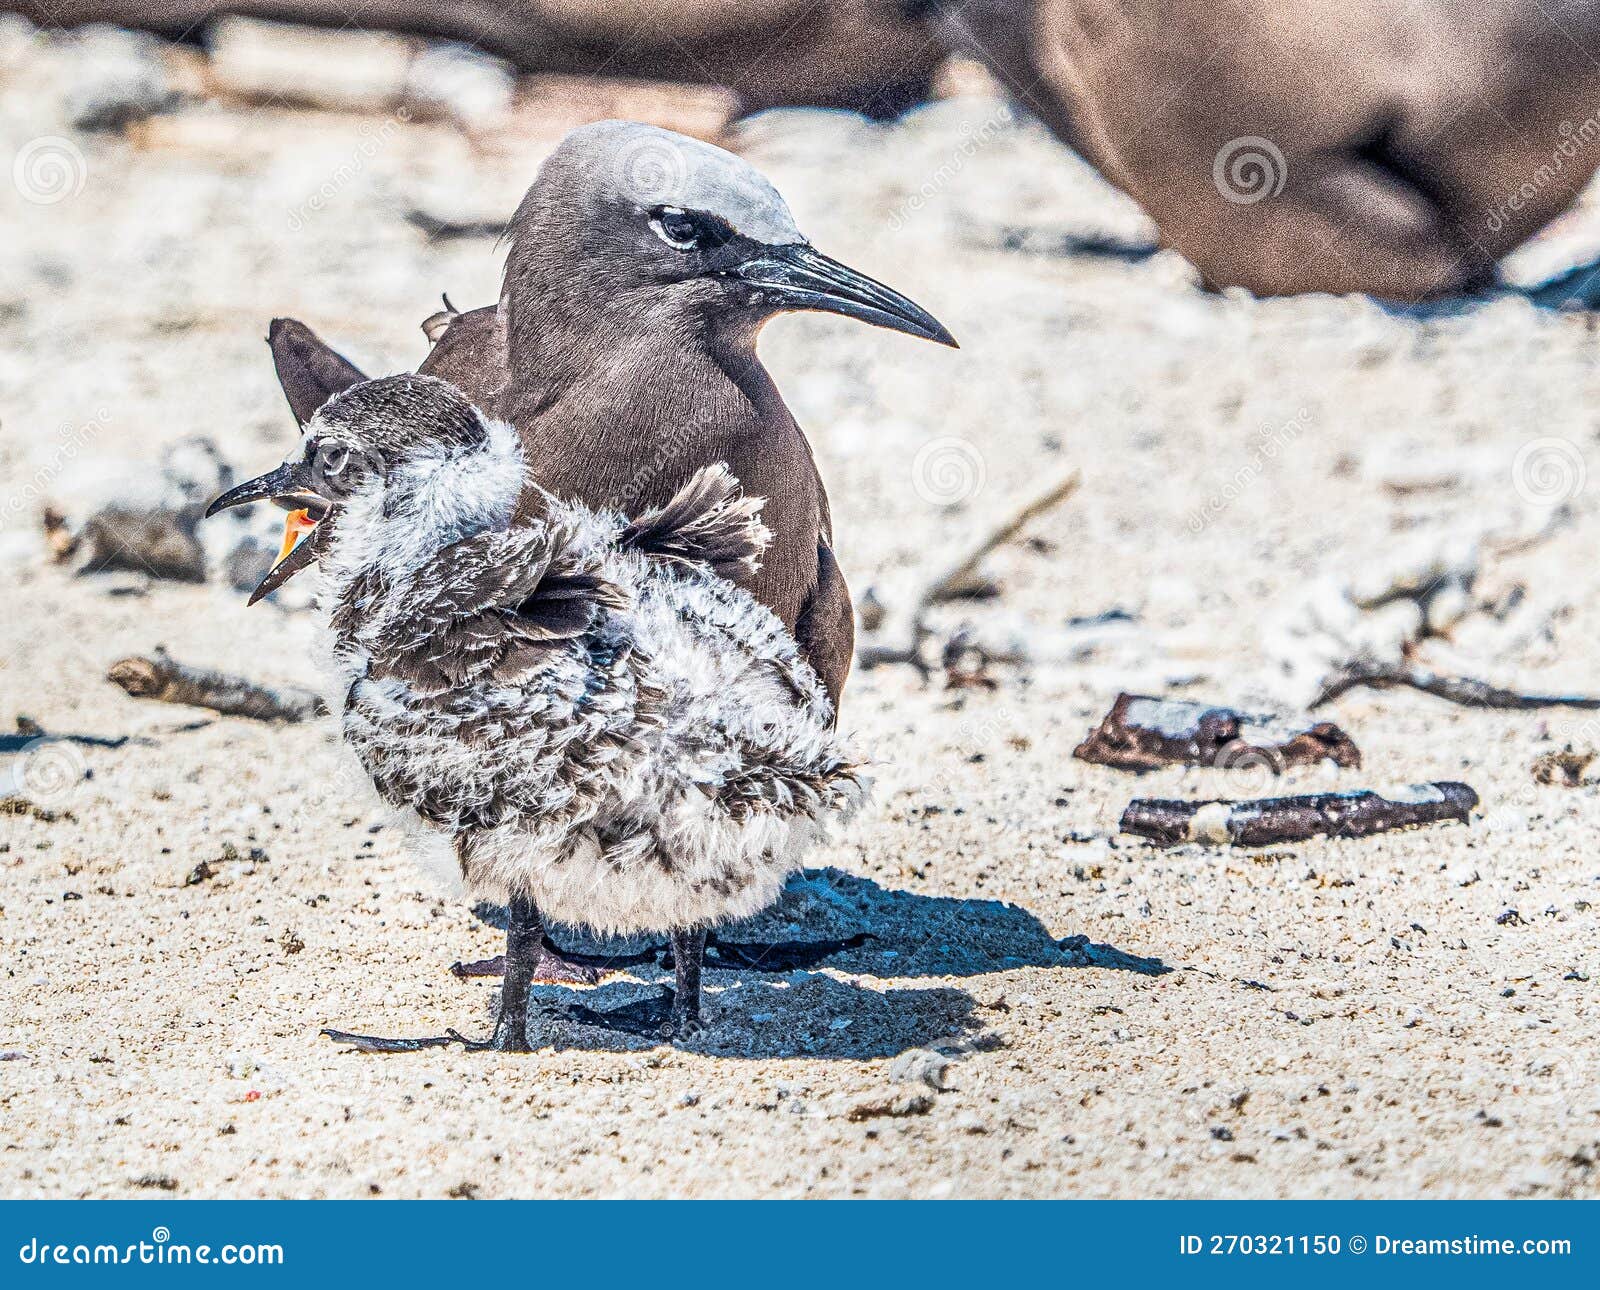 brown noddy parent with chick